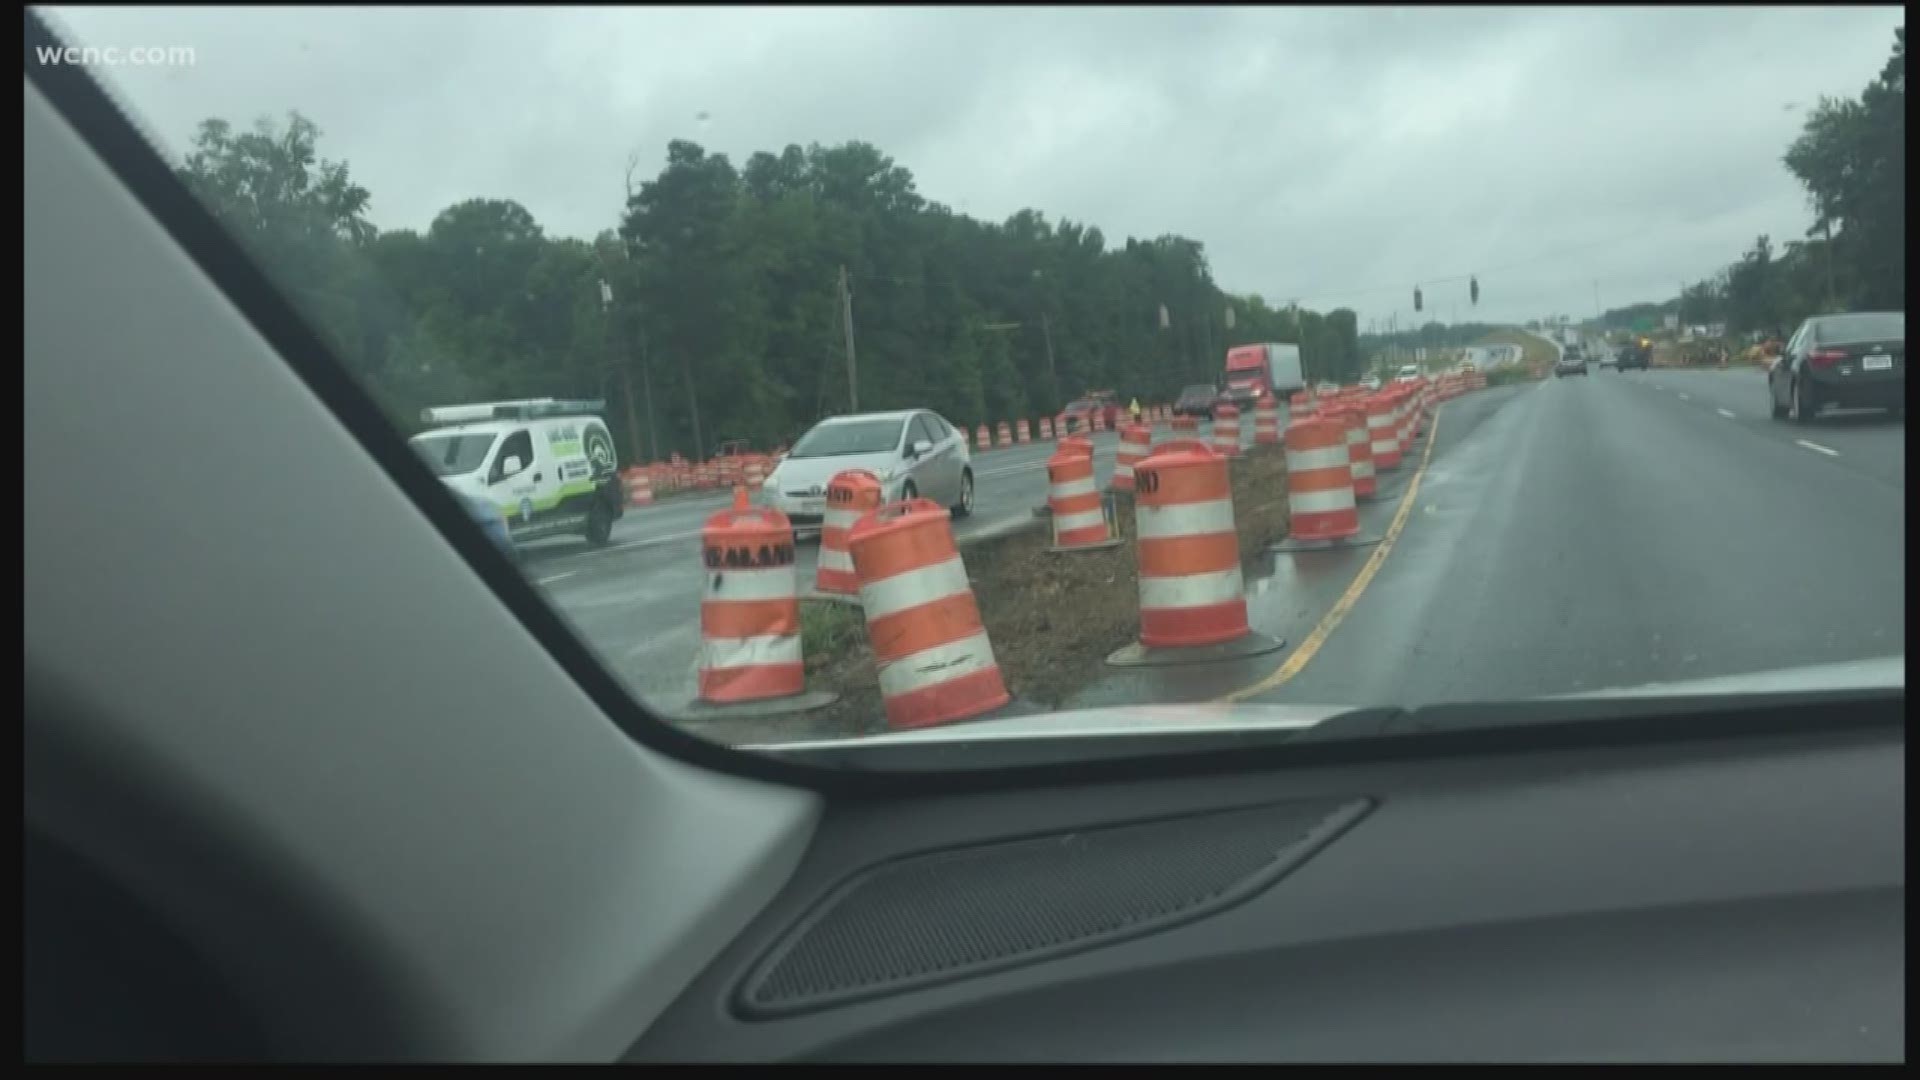 Drivers in Indian Trail are frustrated with construction of what's called a superstreet project on Highway 74. So what exactly is a superstreet intersection and when will the work be finished?